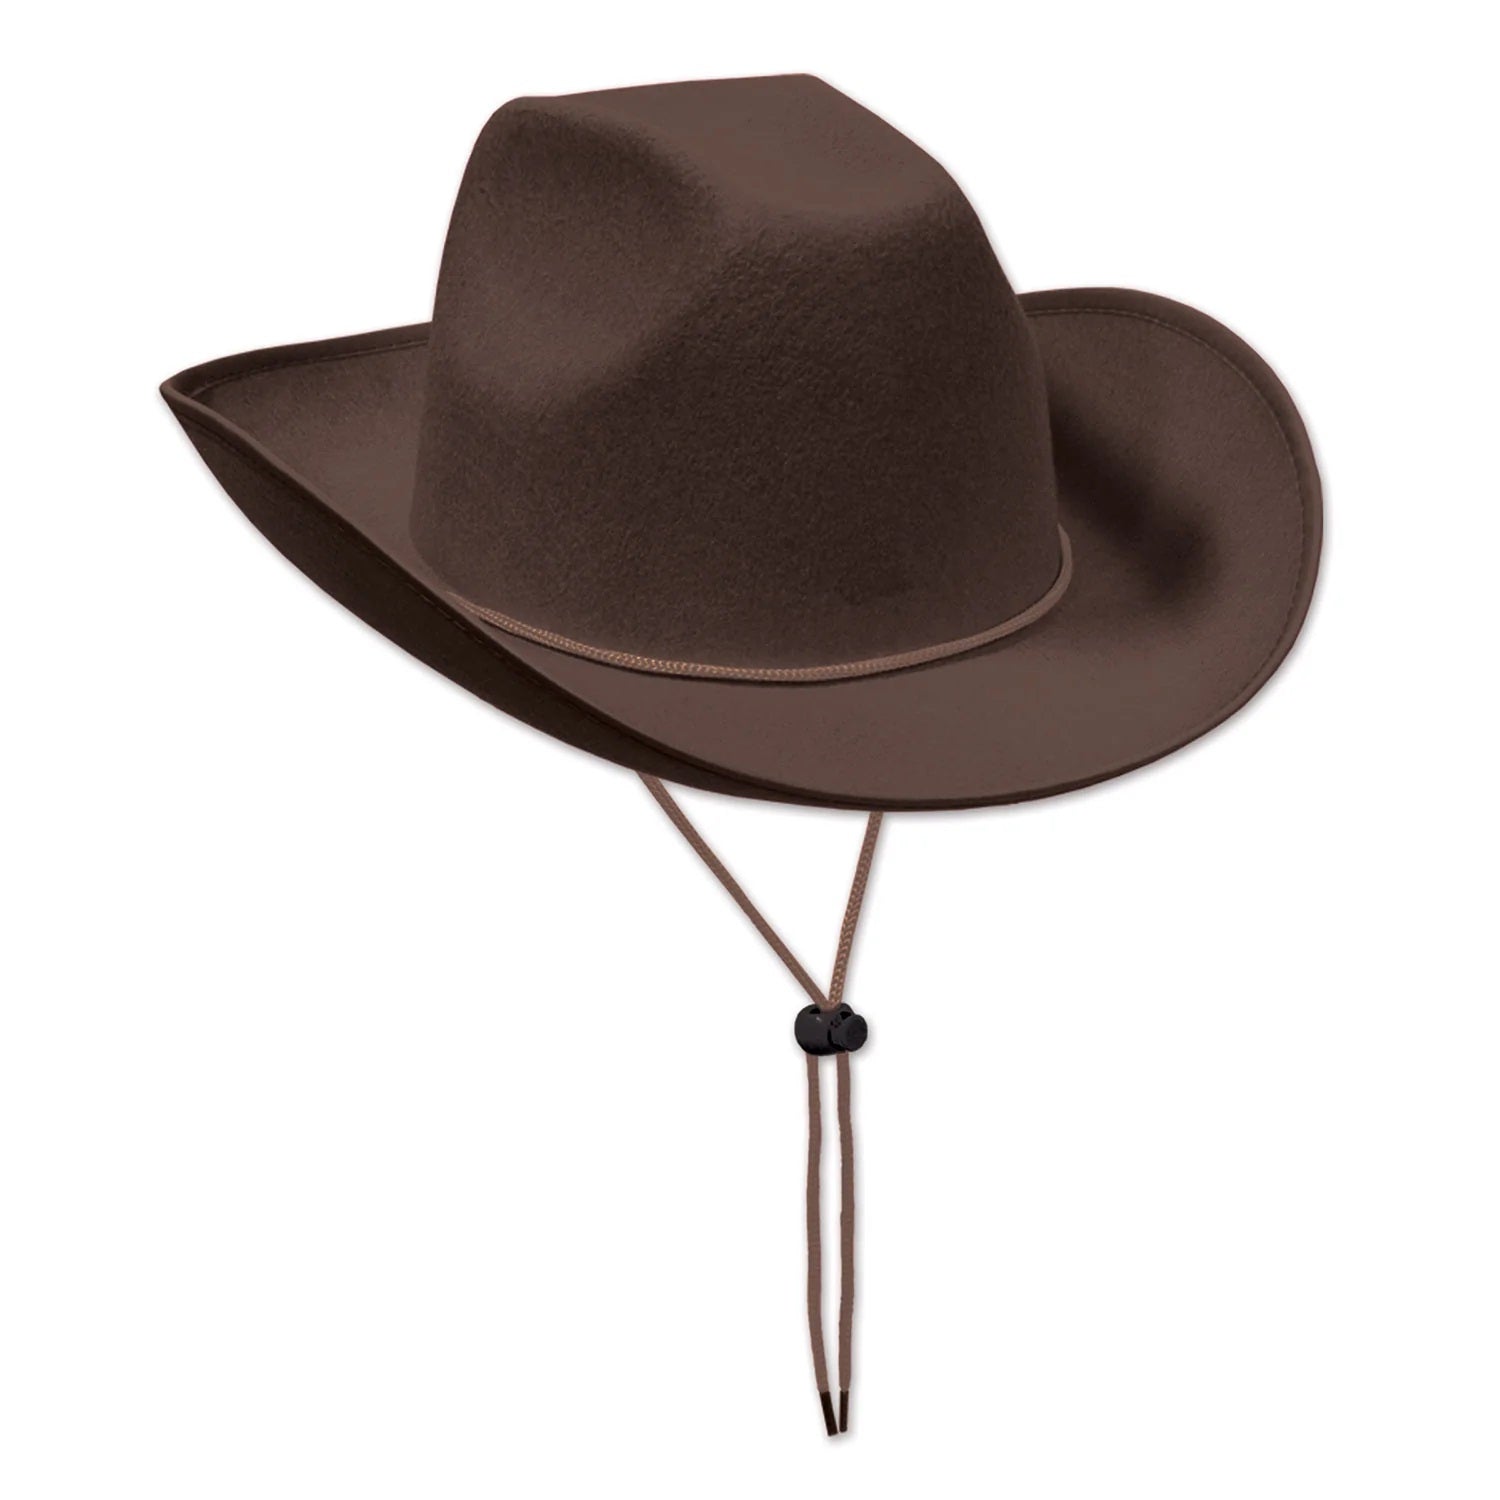 Western Party Costume Items